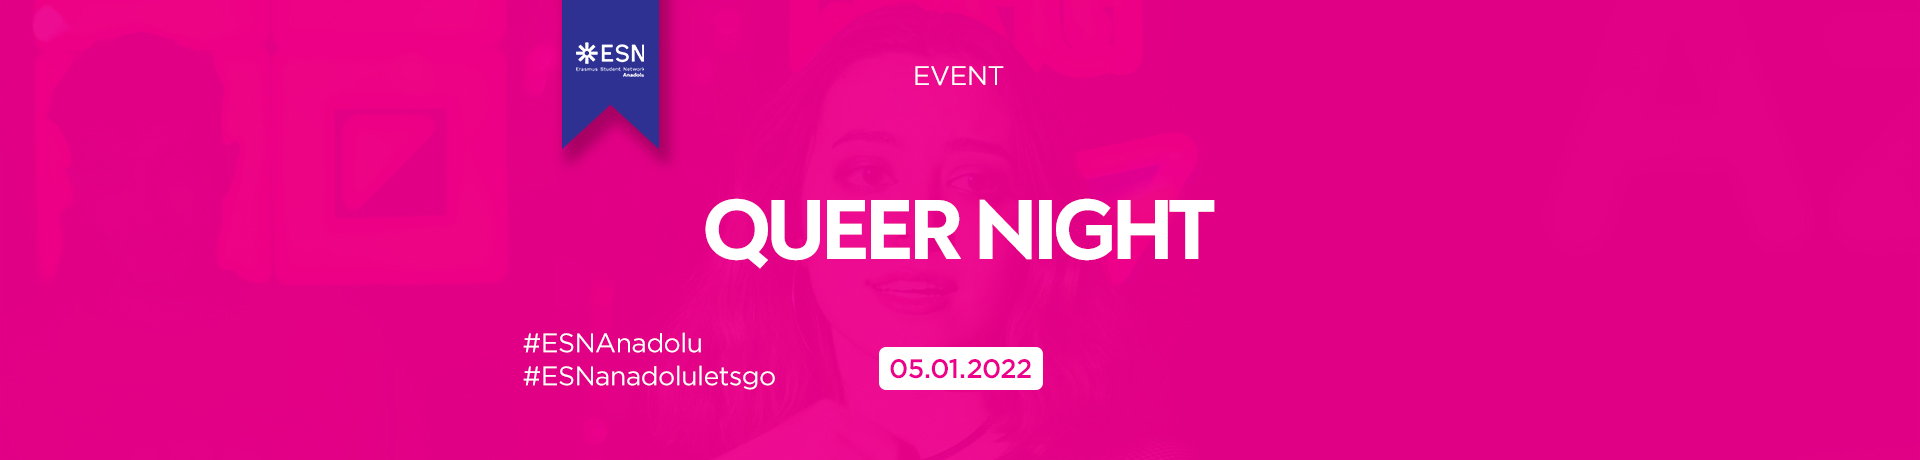 Thumbnail for queer night event of ESN Anadolu